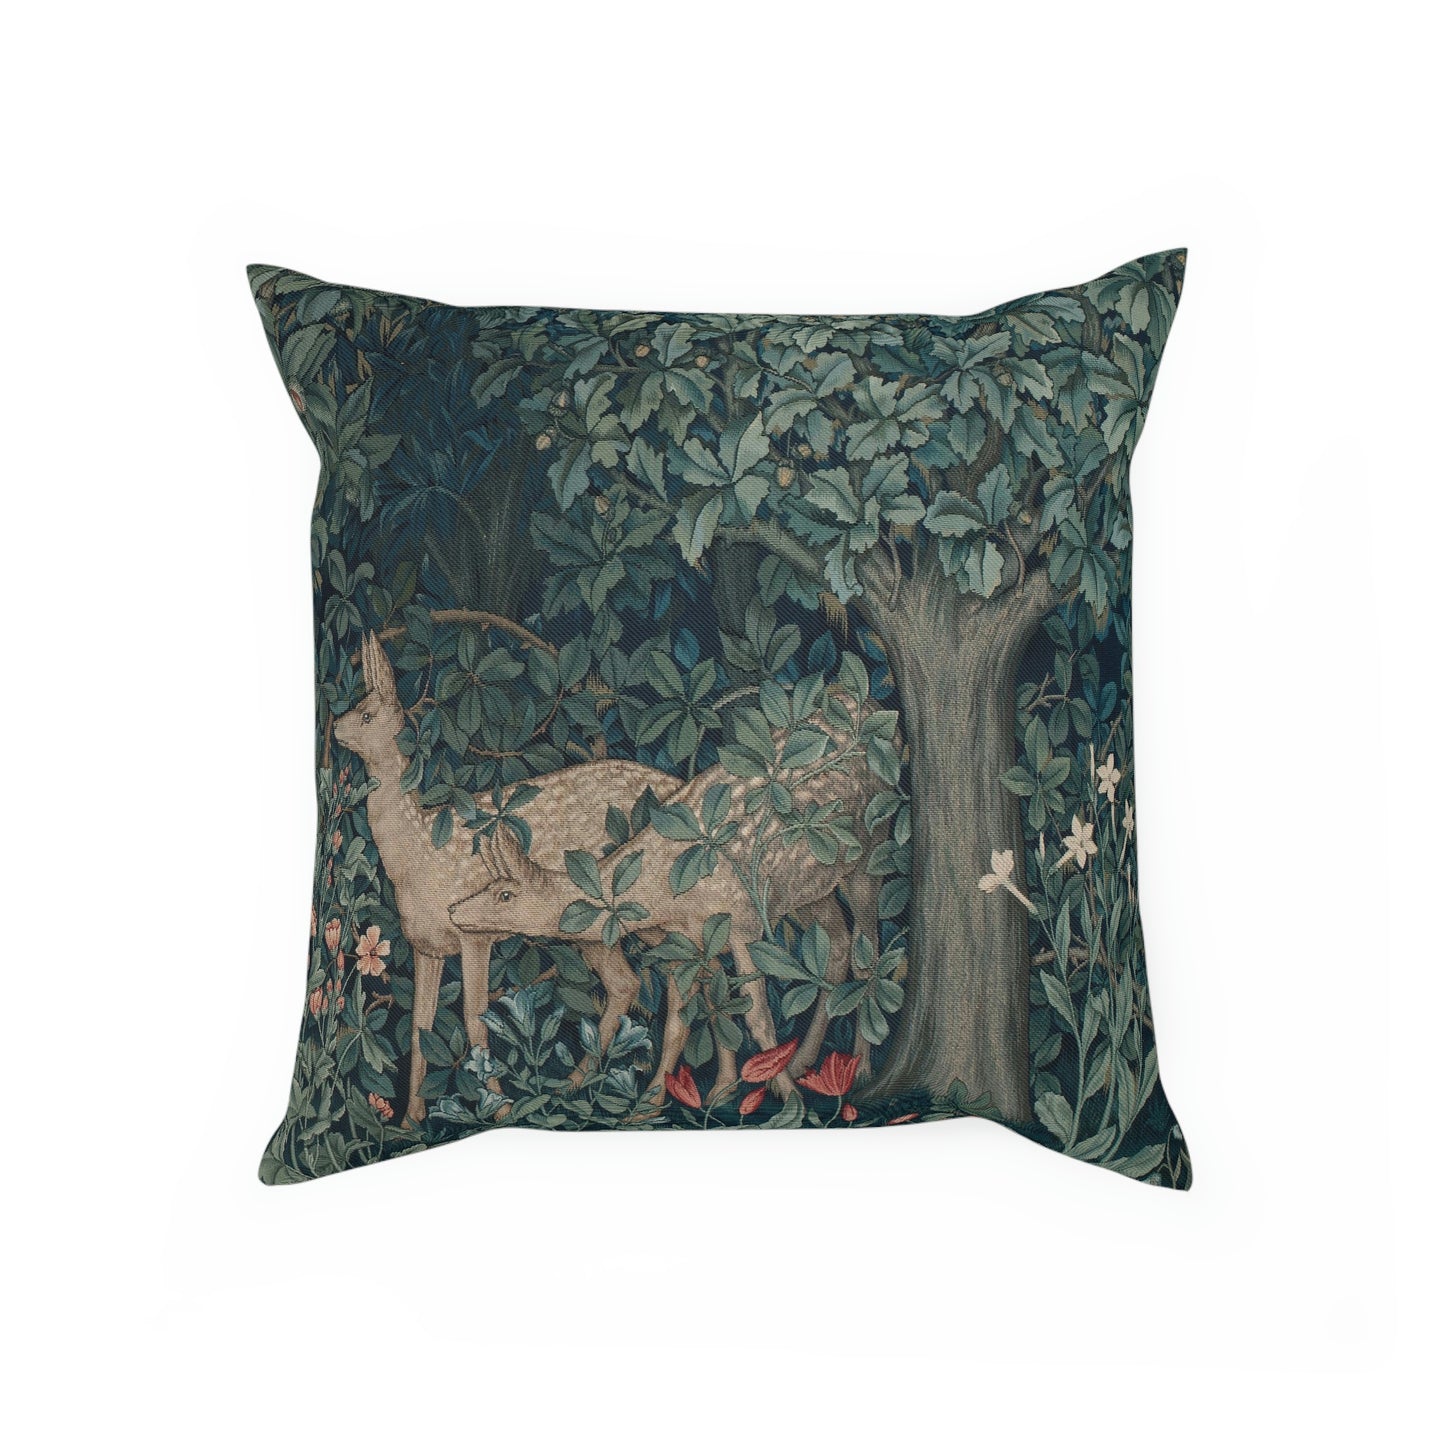 William-Morris-and-Co-Cushion-and-Cushion-Cover-Dear-by-John-Henry-Dearle-Green-Forest-Collection-6